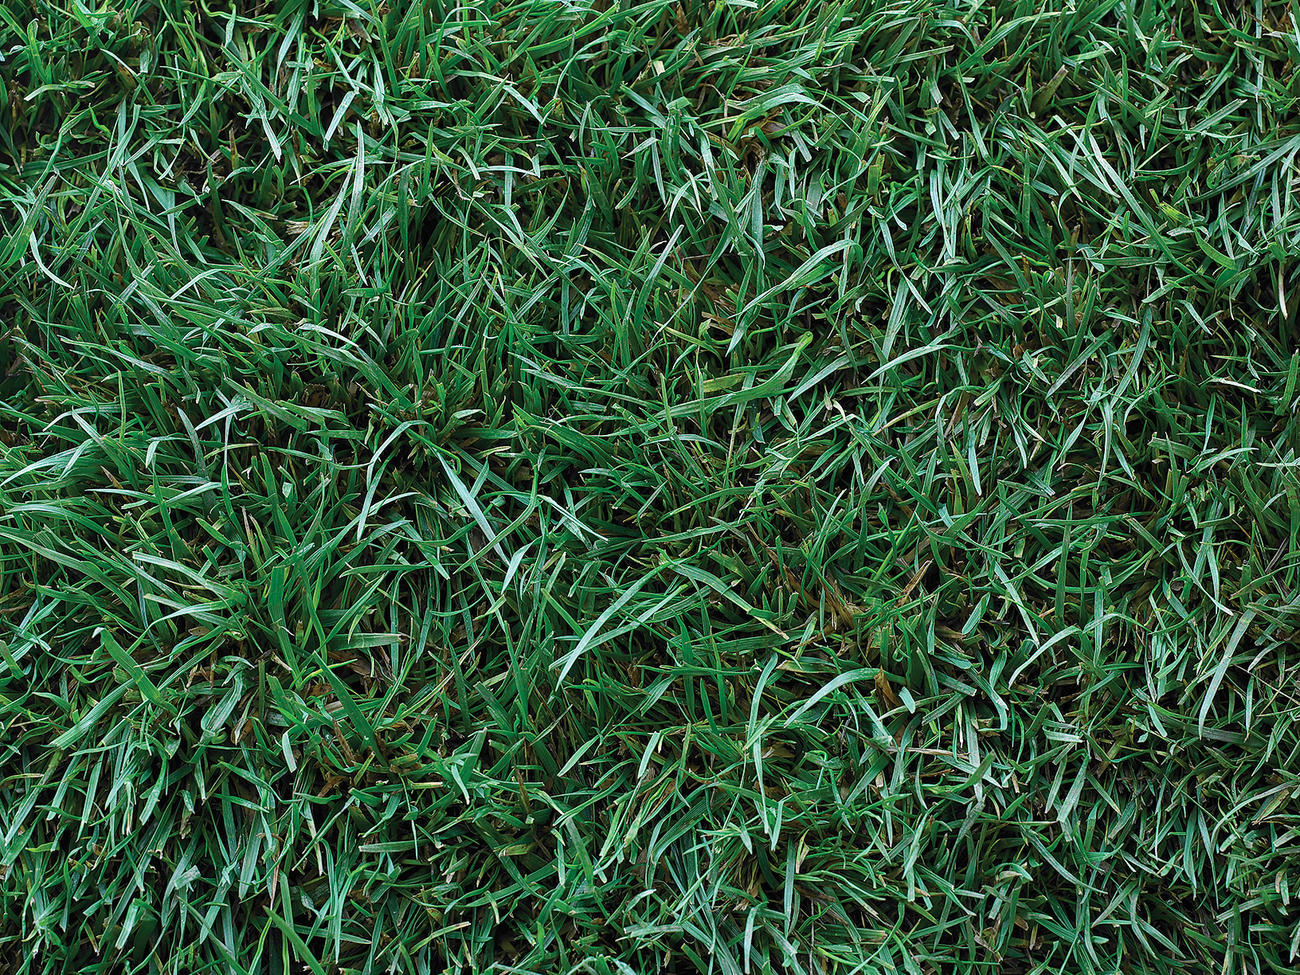 Should You Fake the Lawn?